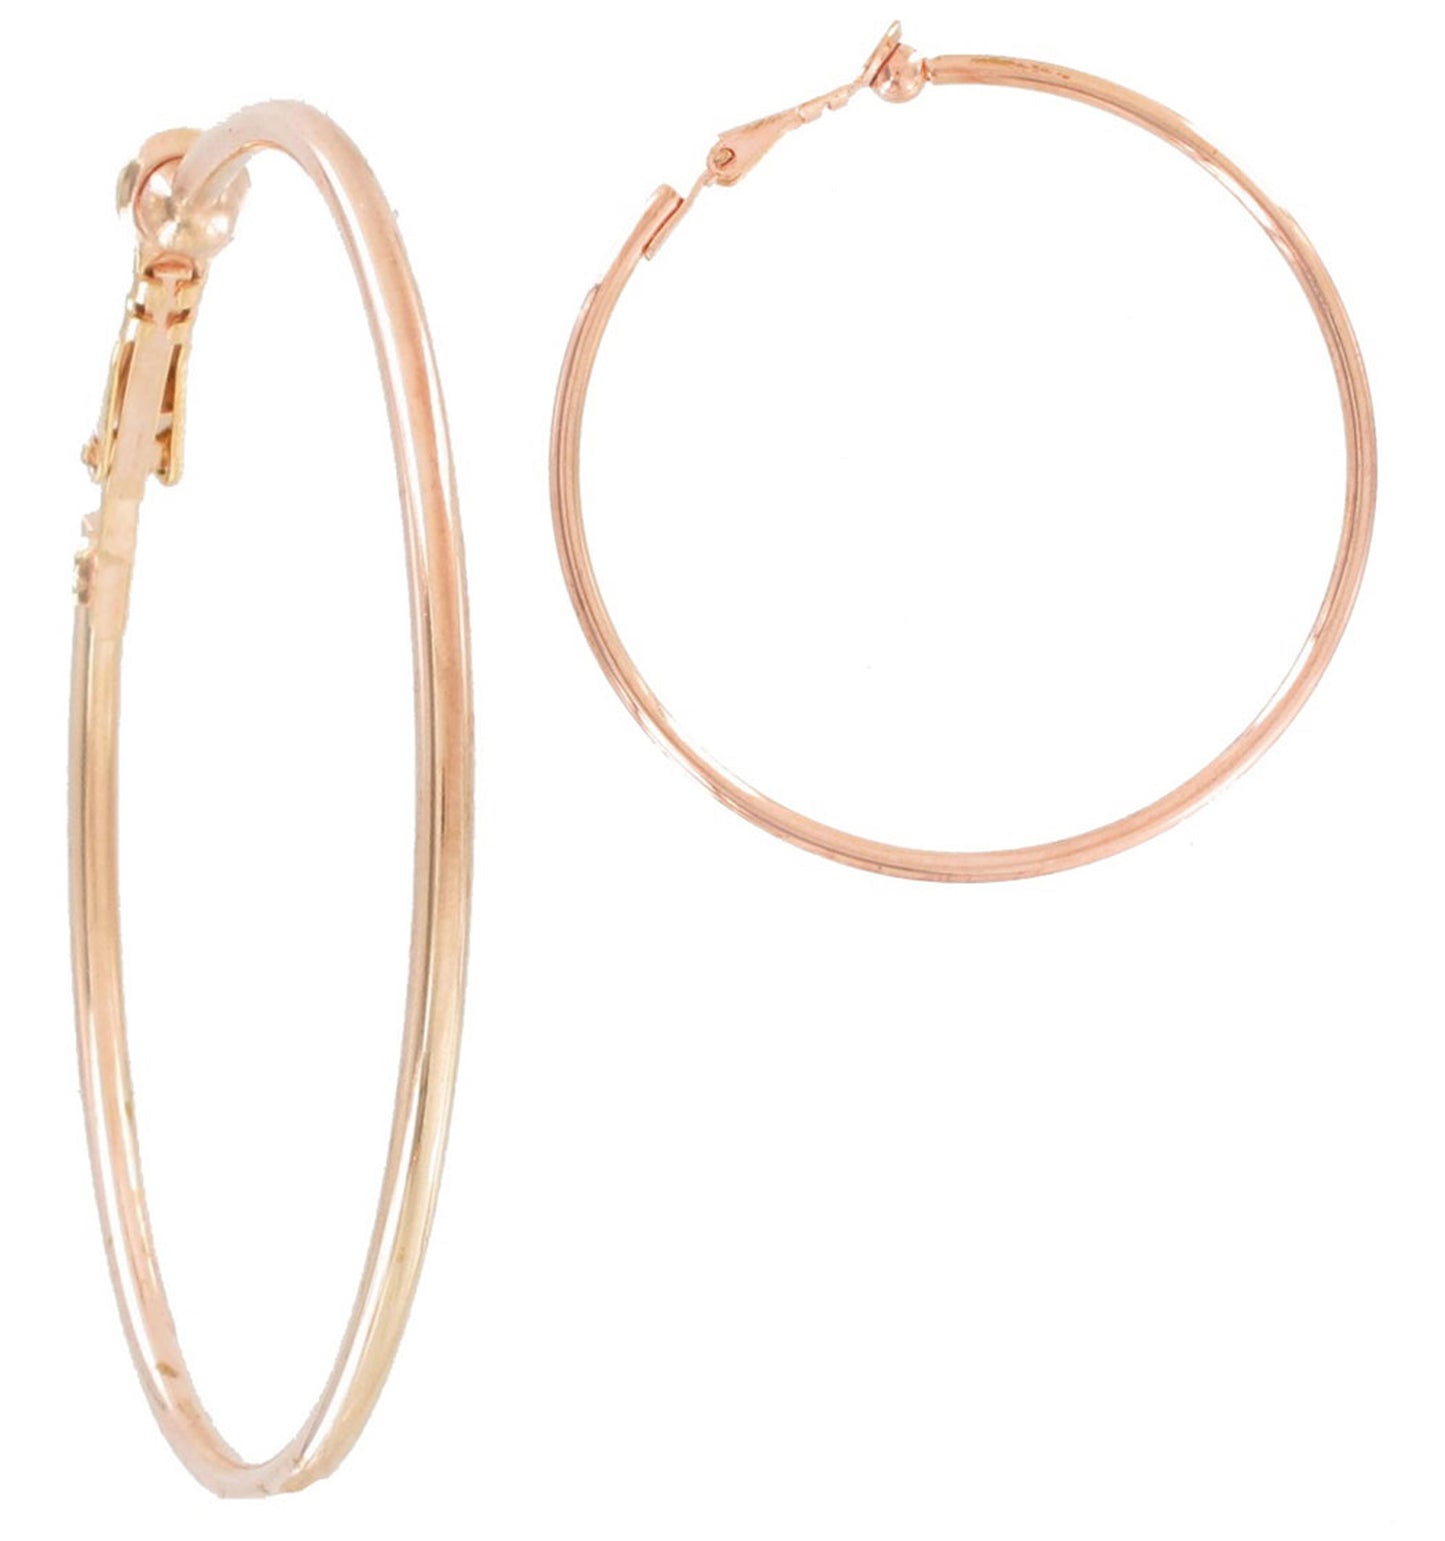 Ky & Co Rose Gold Tone Clip On Hoop Earrings USA Made 2"